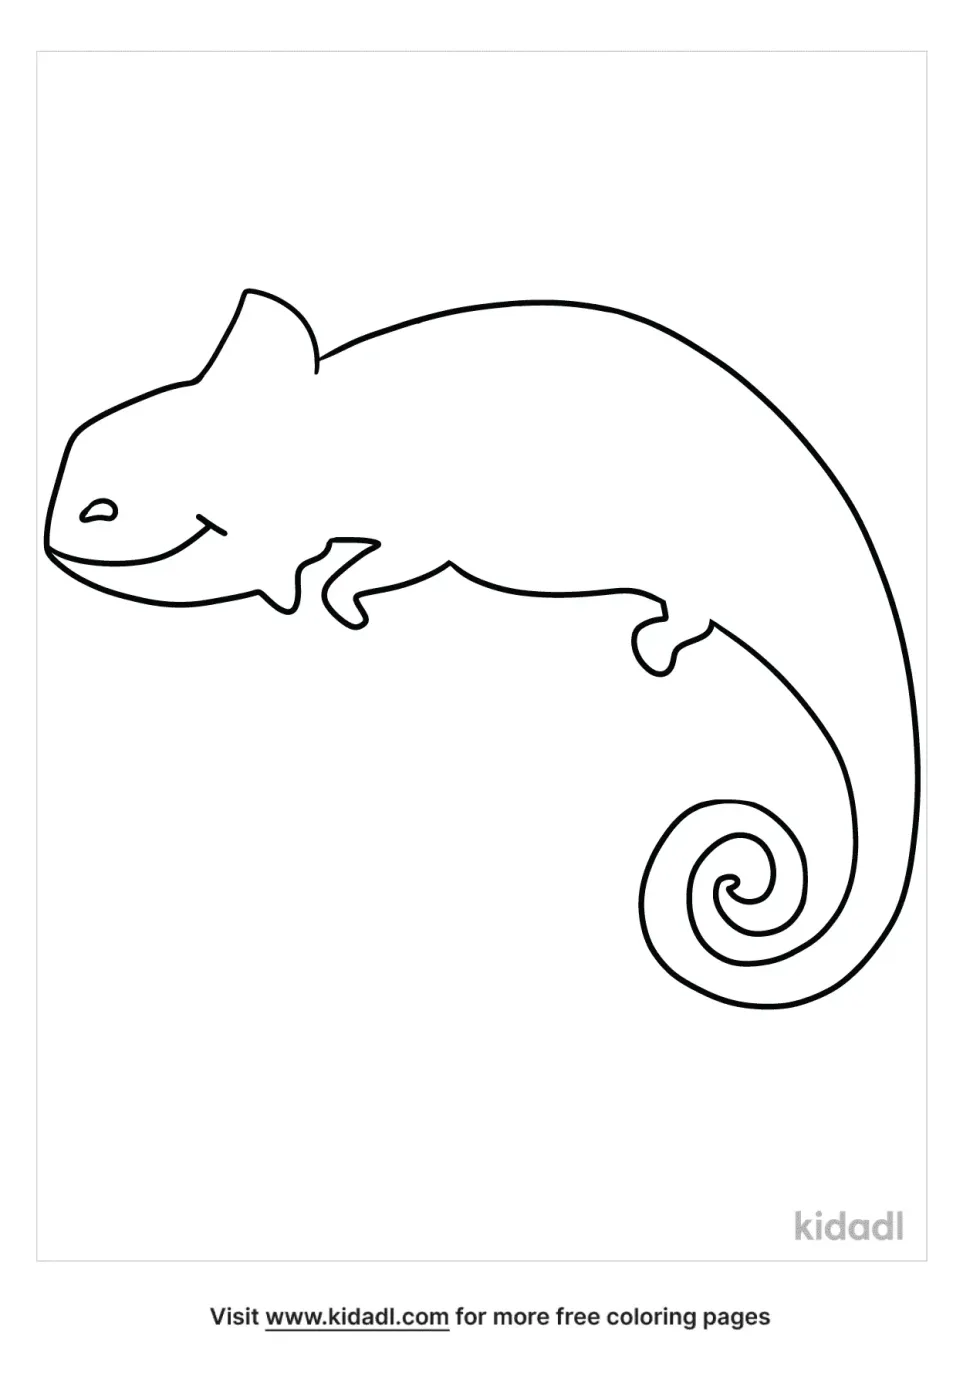 Chameleon Outline Coloring Page